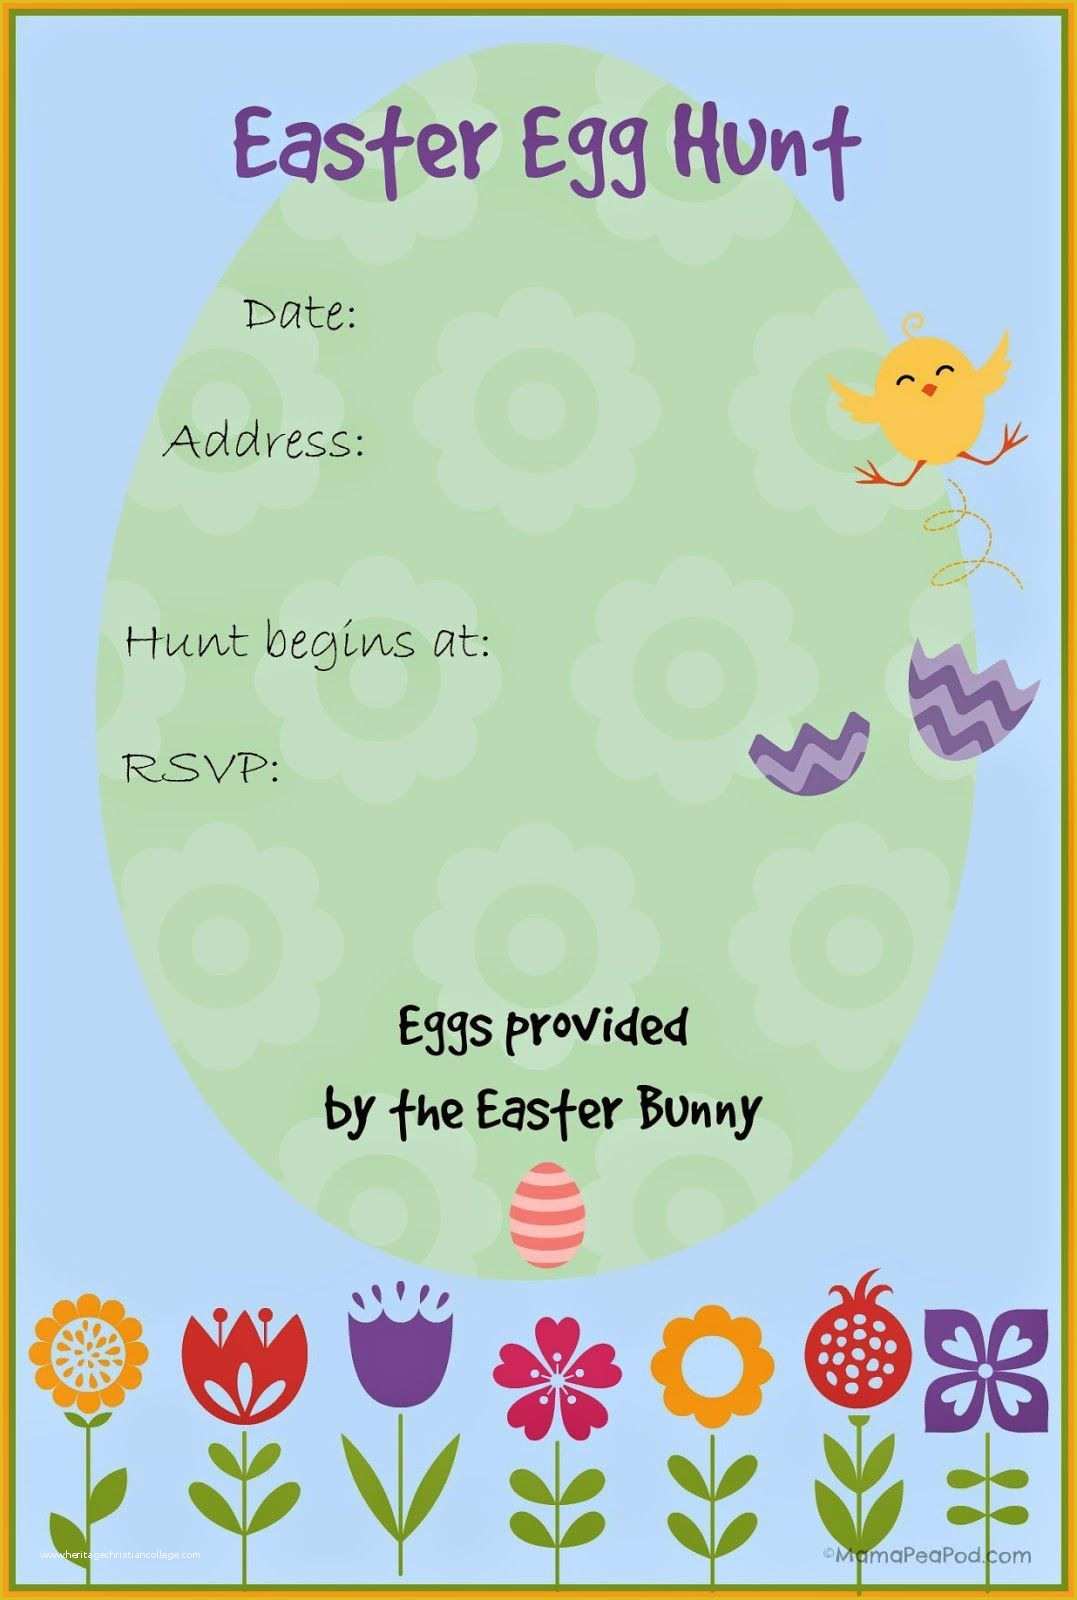 Spring Party Invitation Templates Free Of Free Printable Easter Egg Hunt Invitation